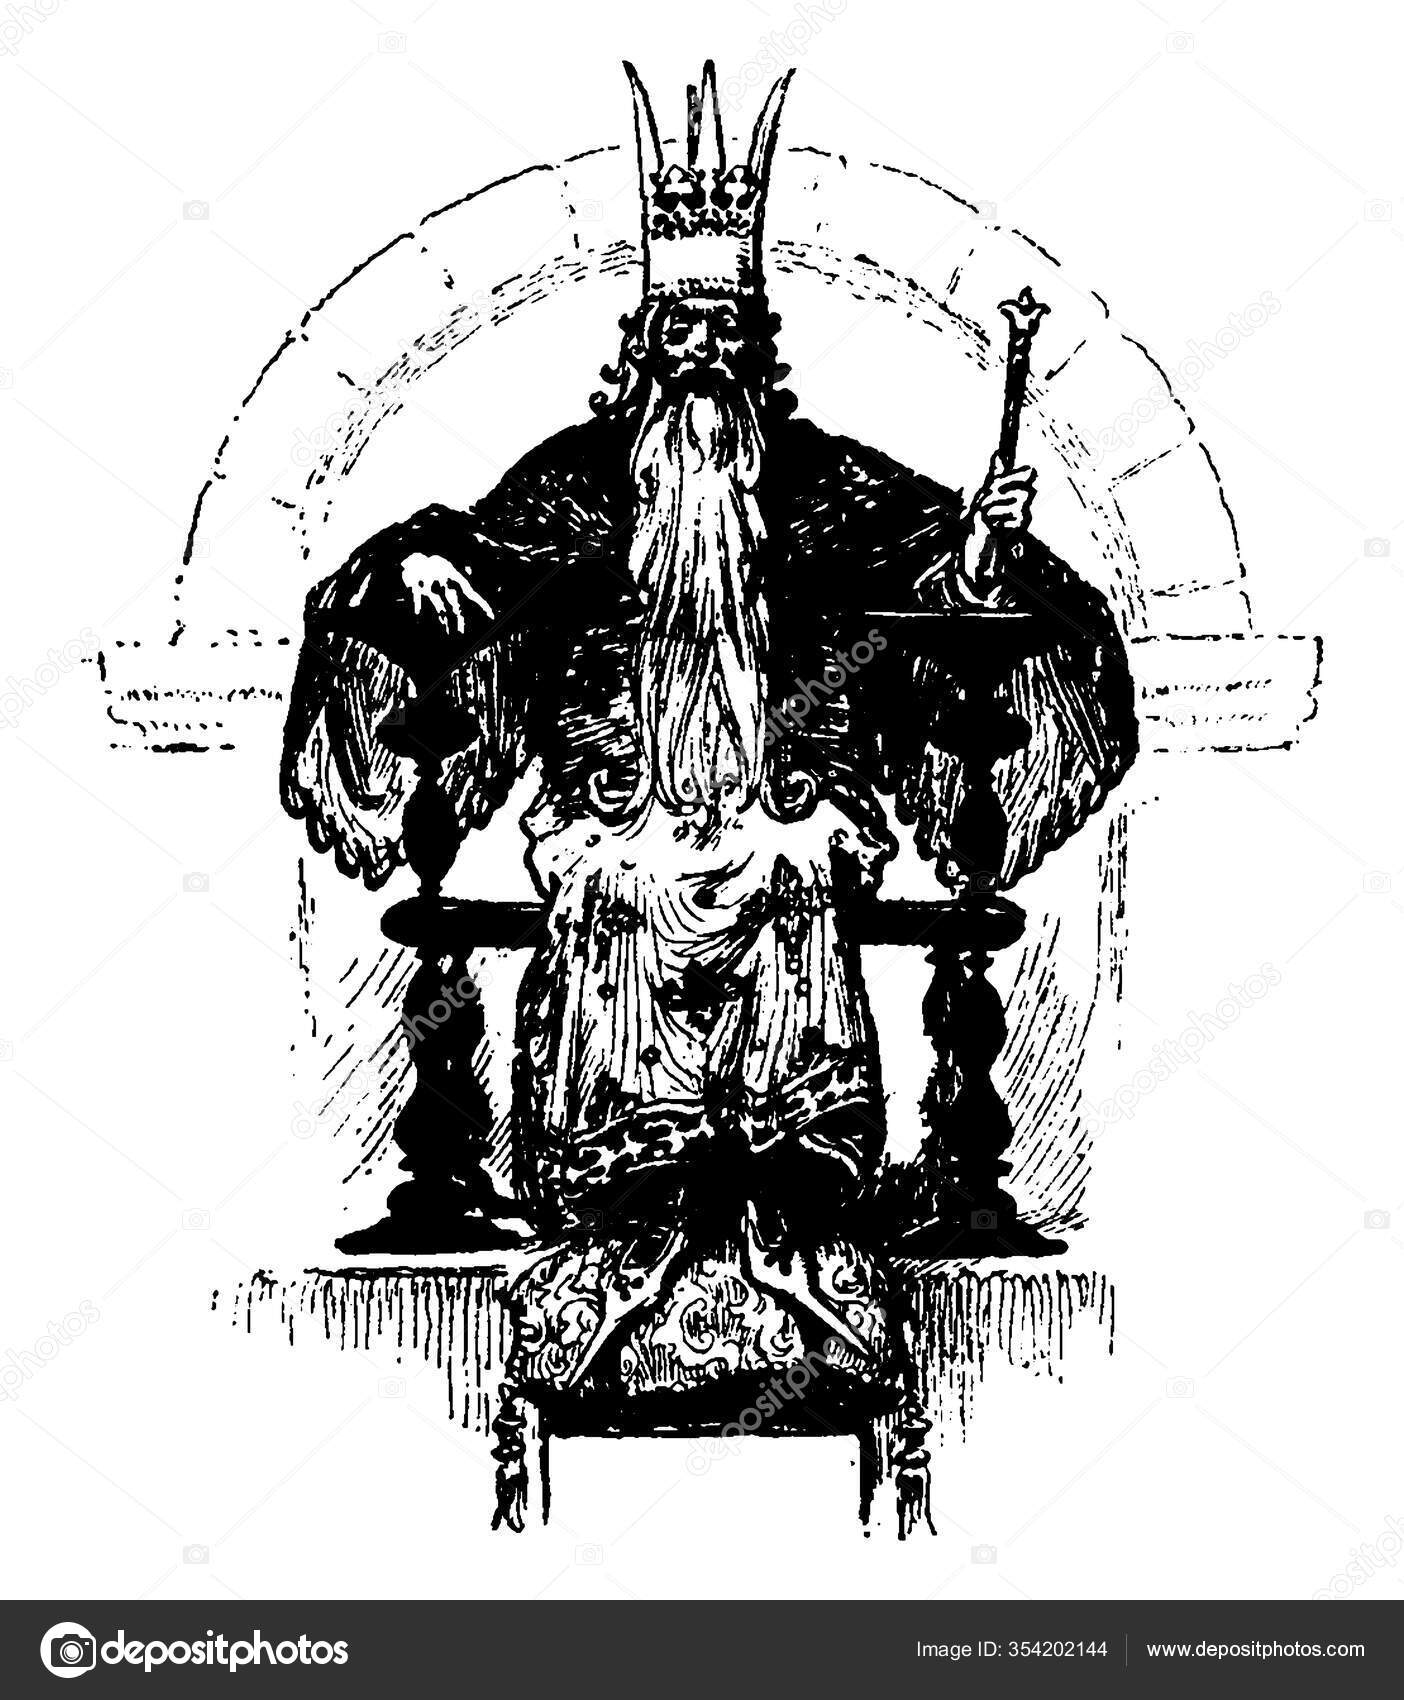 The king with crown on head sitting on throne and holding staff in hand, vi...